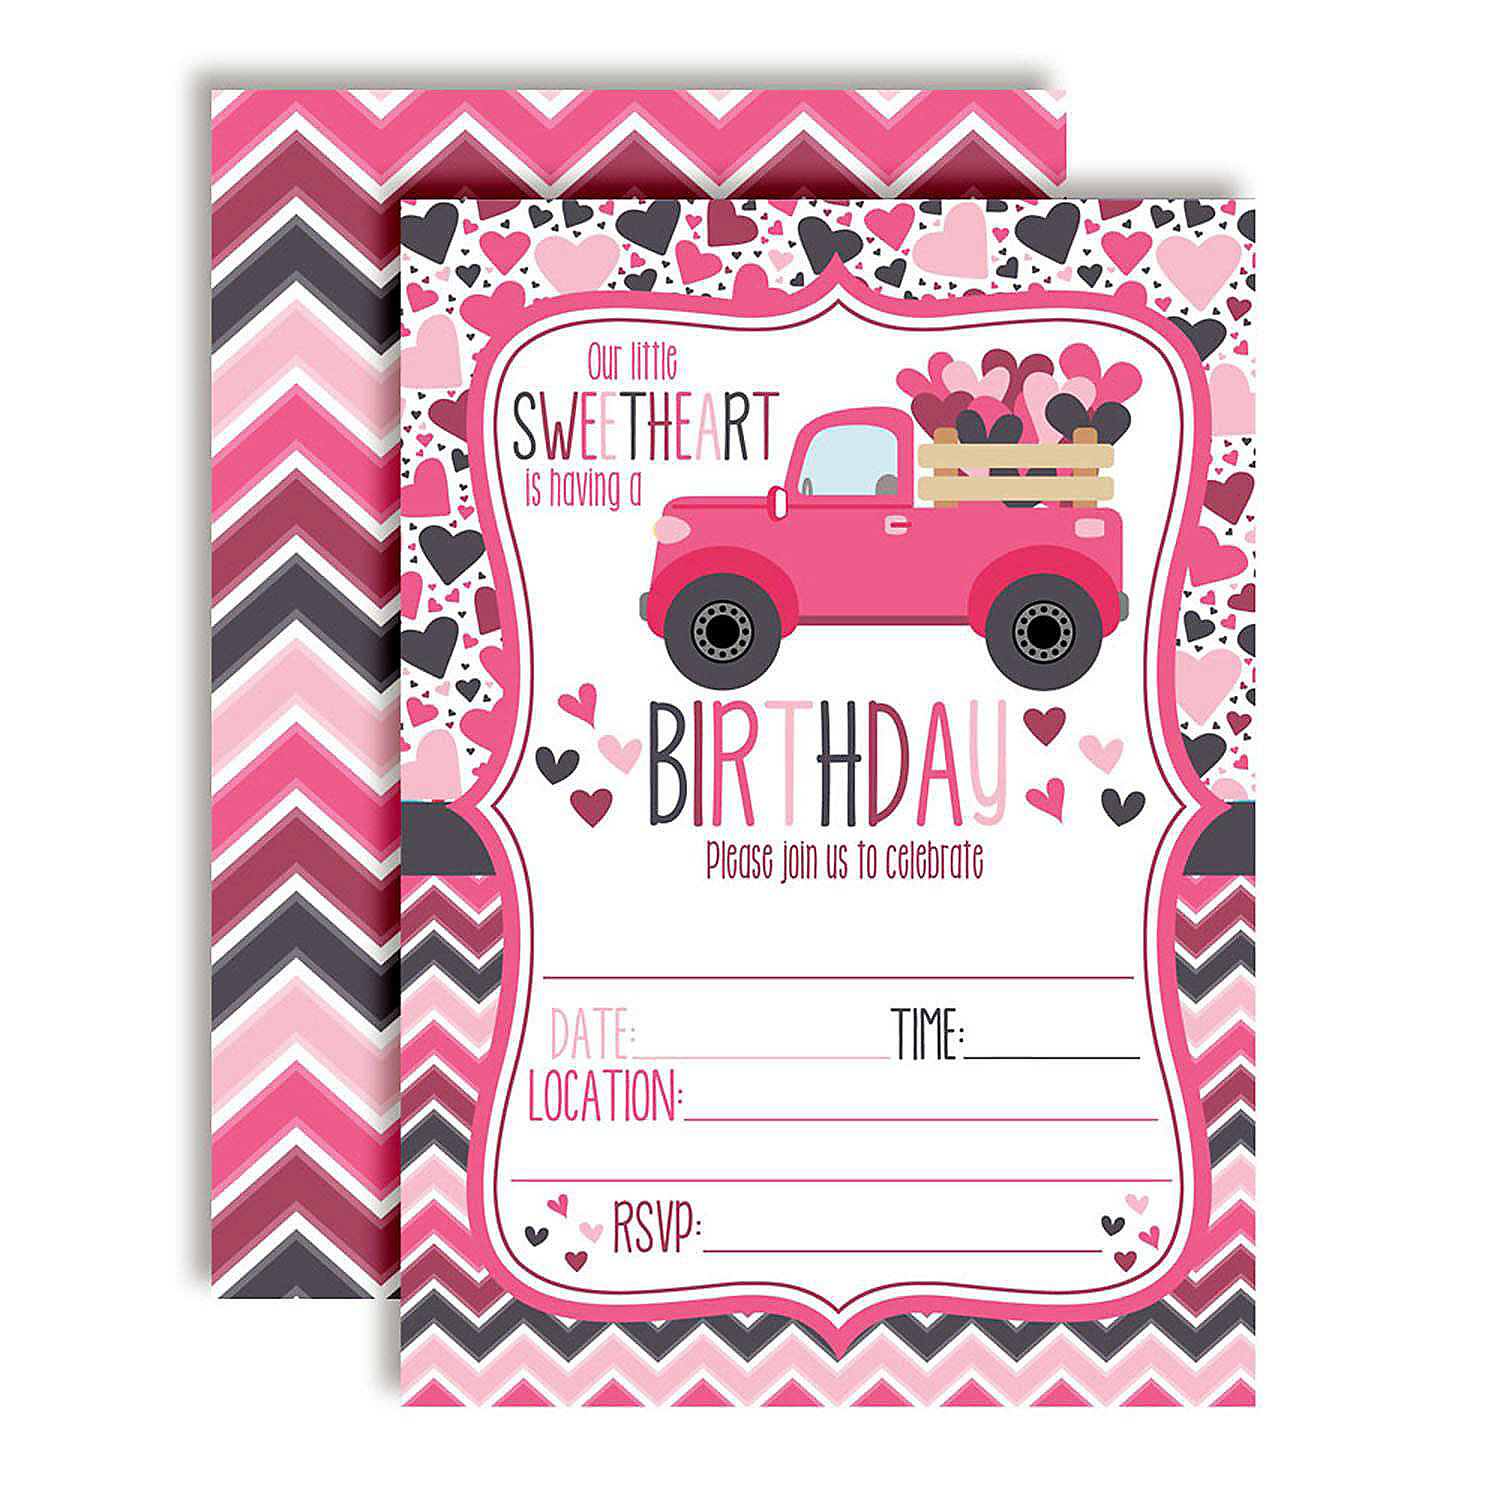 Sweetheart Truck Girl Birthday Party Invitations 40pc. by AmandaCreation |  Oriental Trading